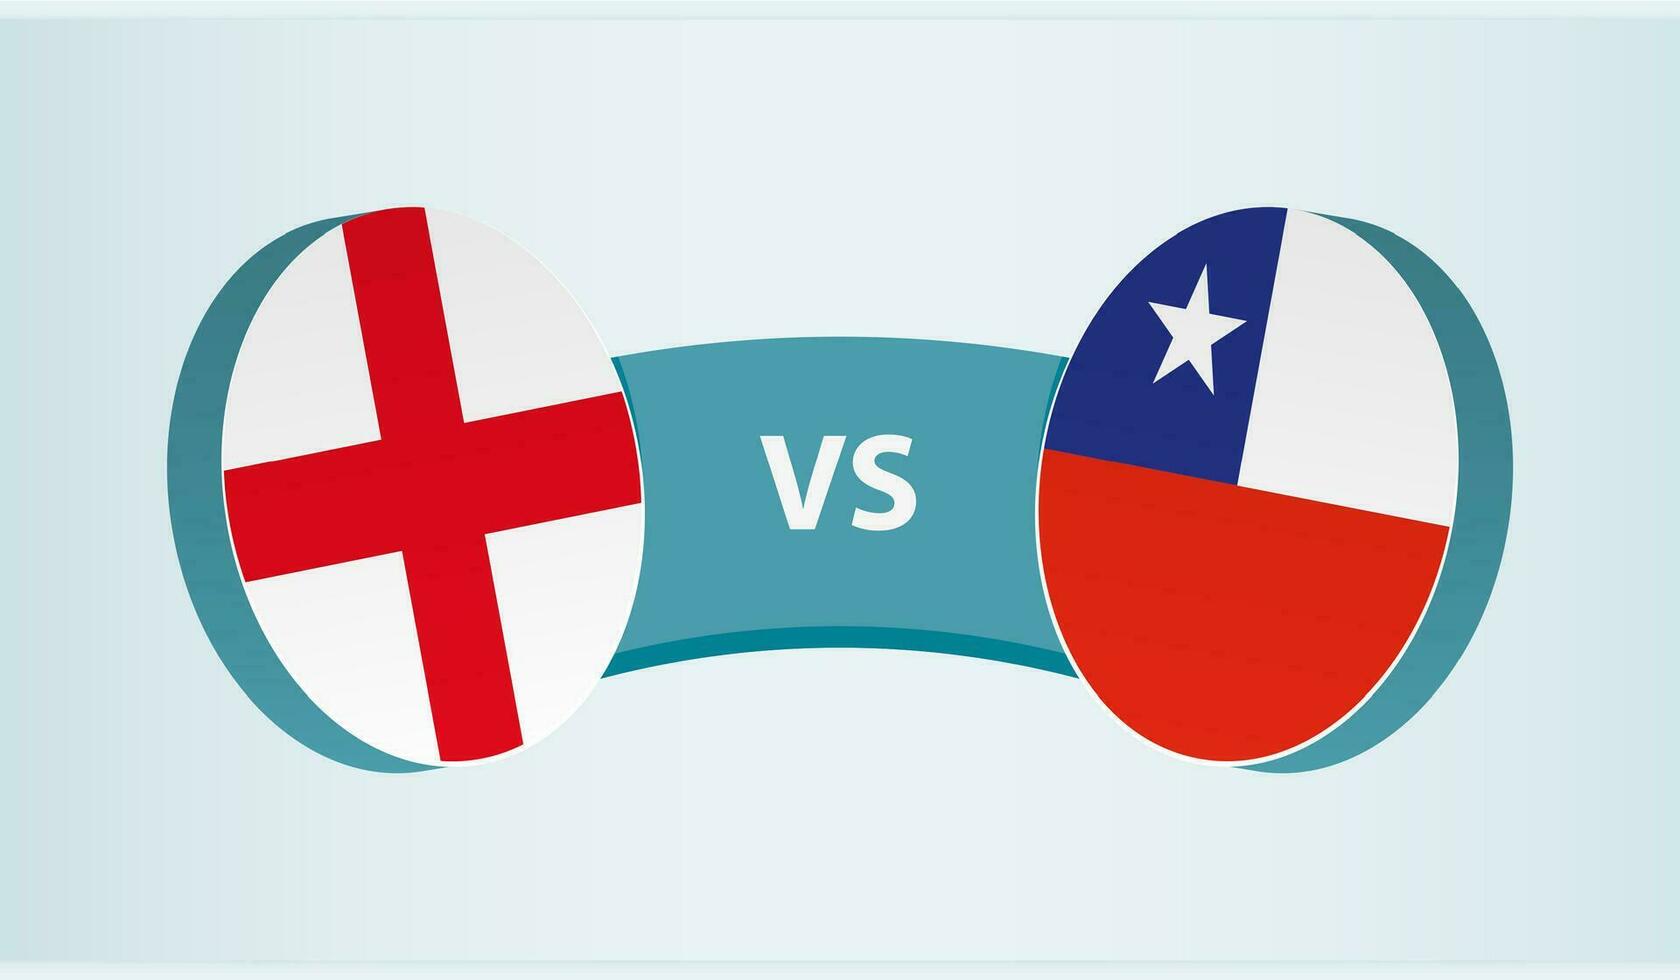 England versus Chile, team sports competition concept. vector